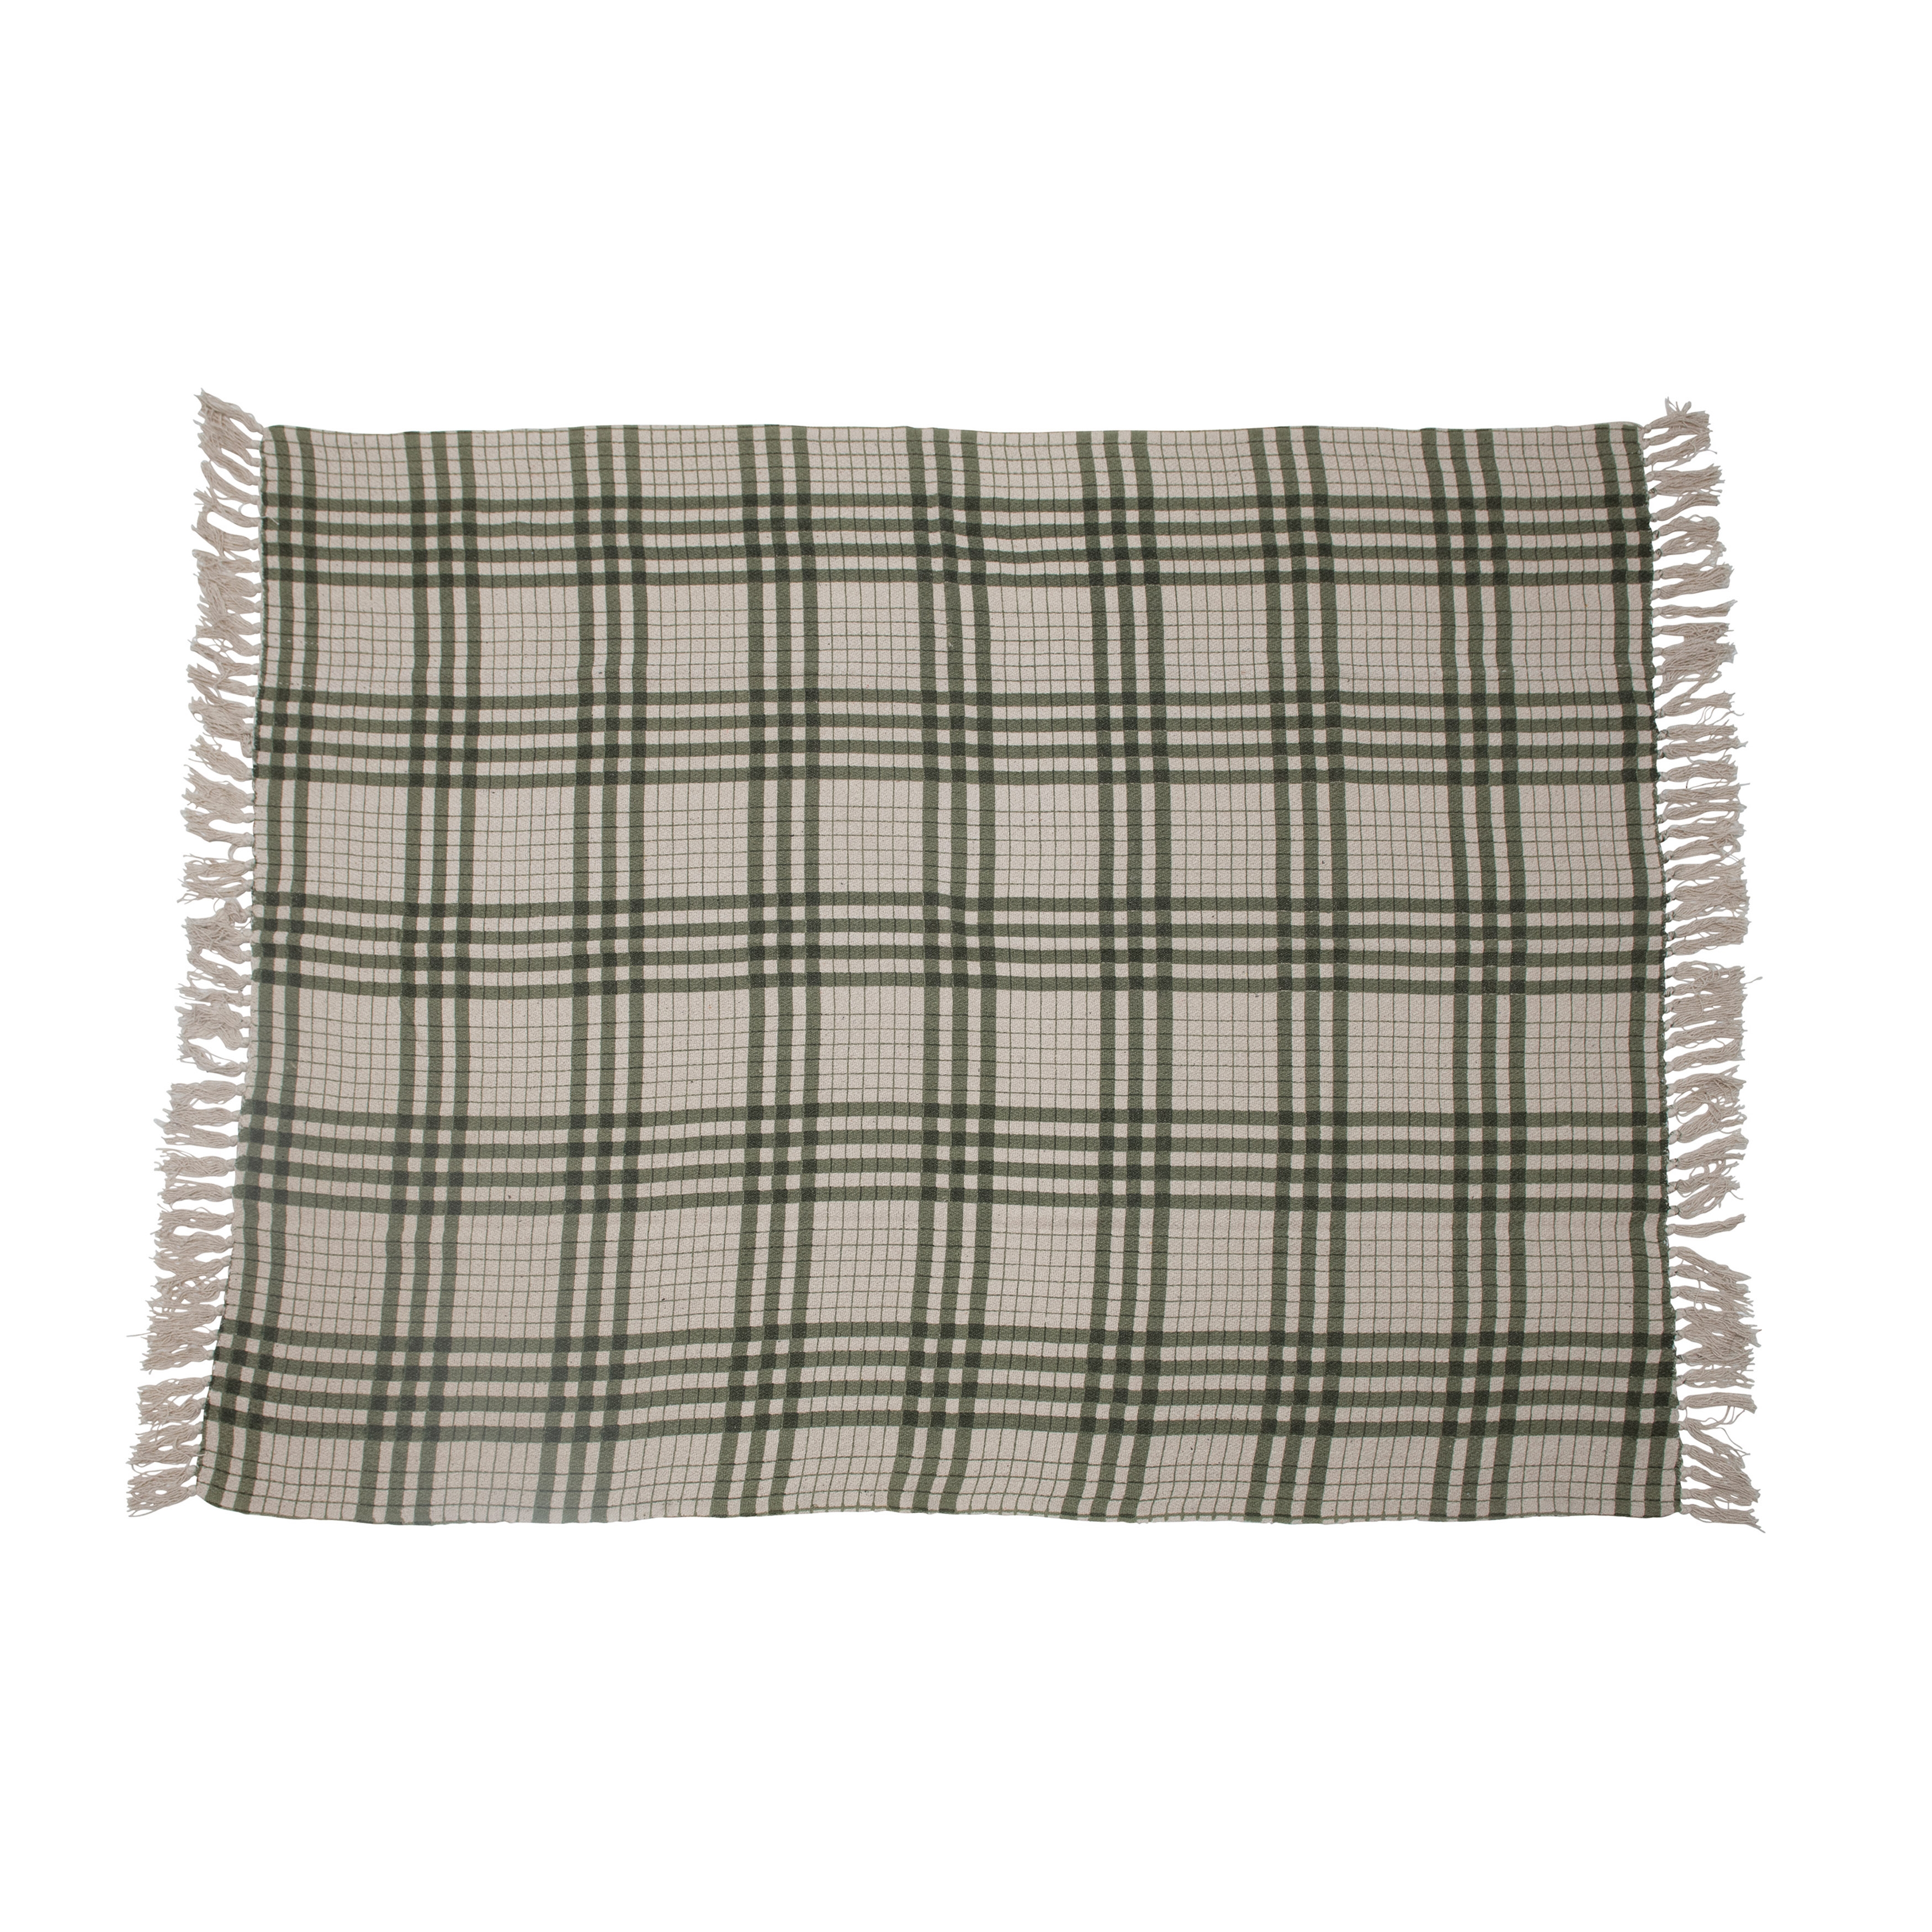 Recycled Cotton Printed Plaid Throw Blanket, Green - Image 0